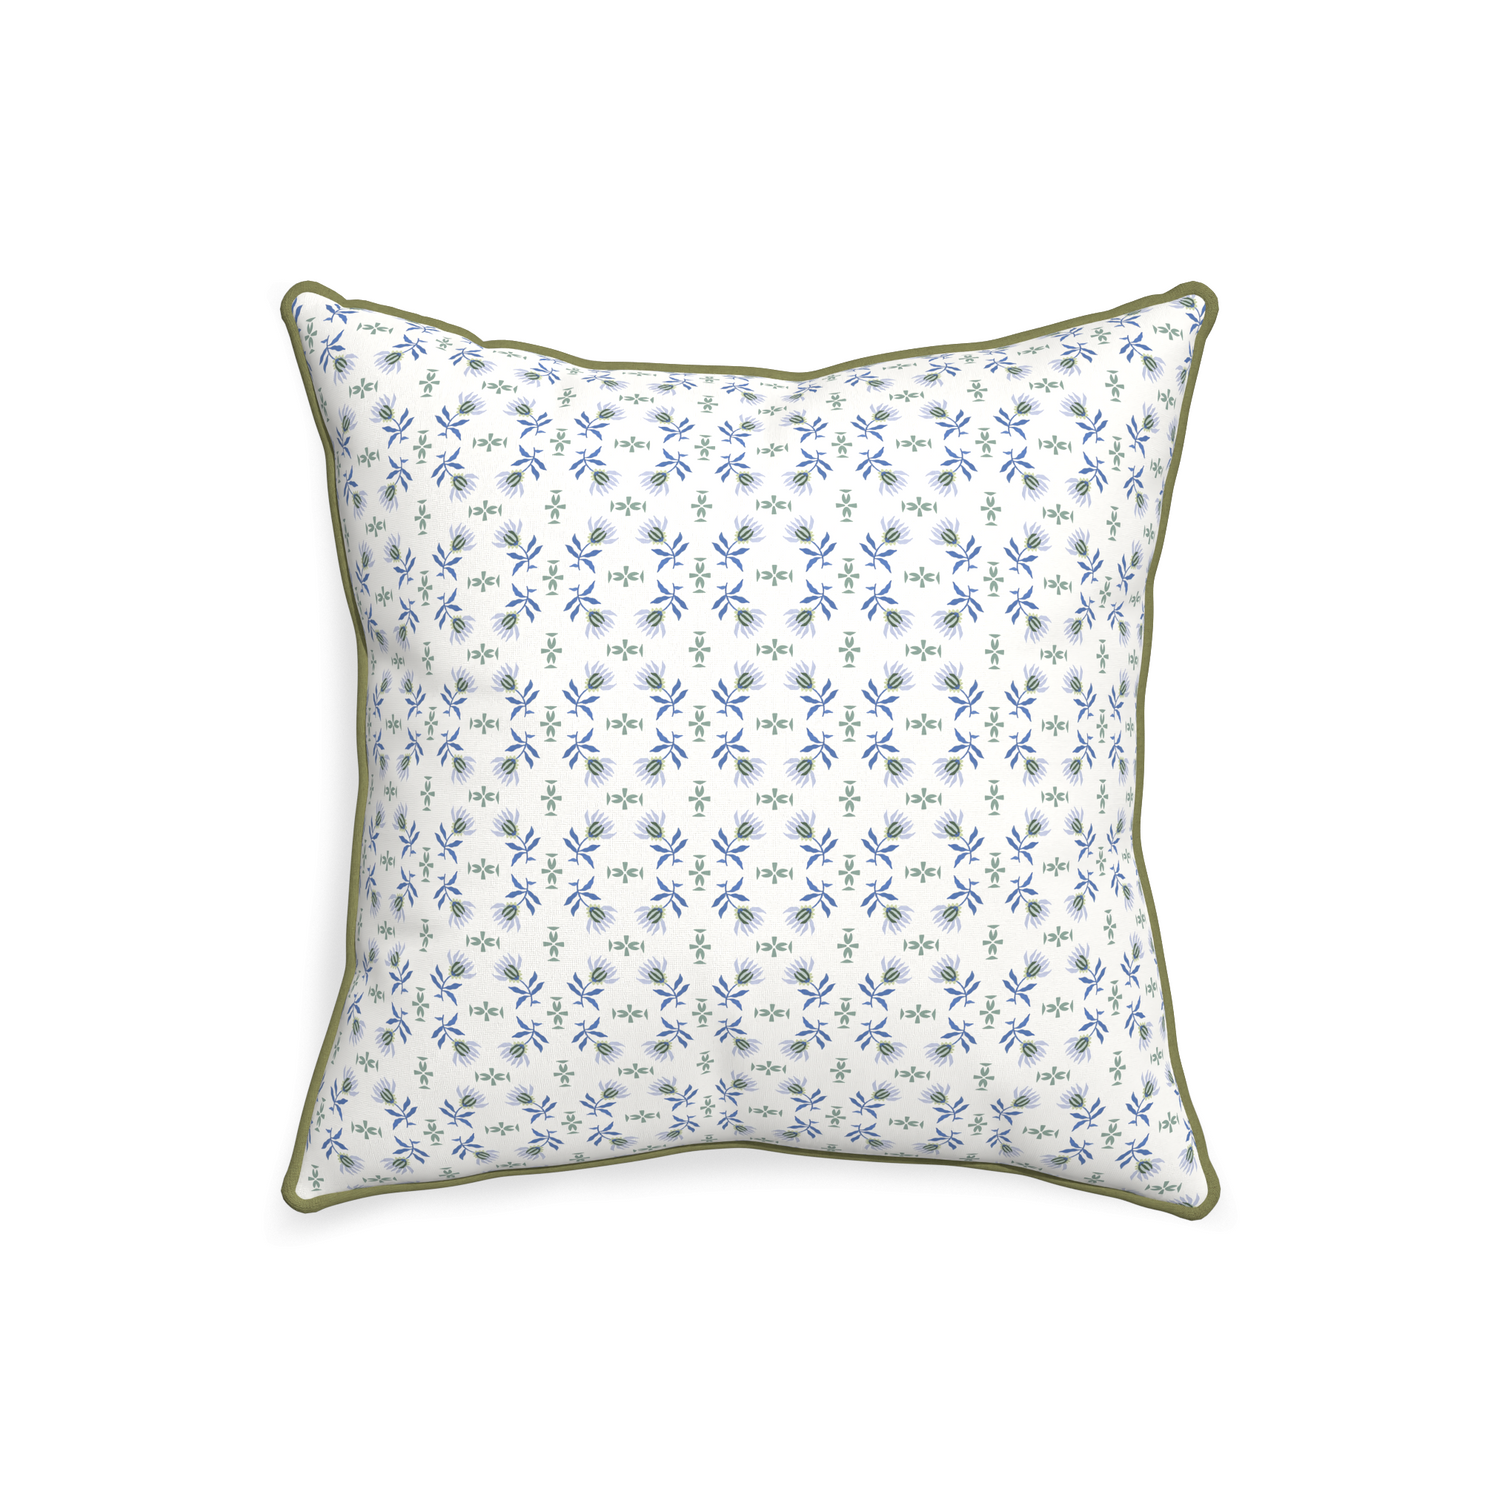 square blue and green floral pillow with moss green piping